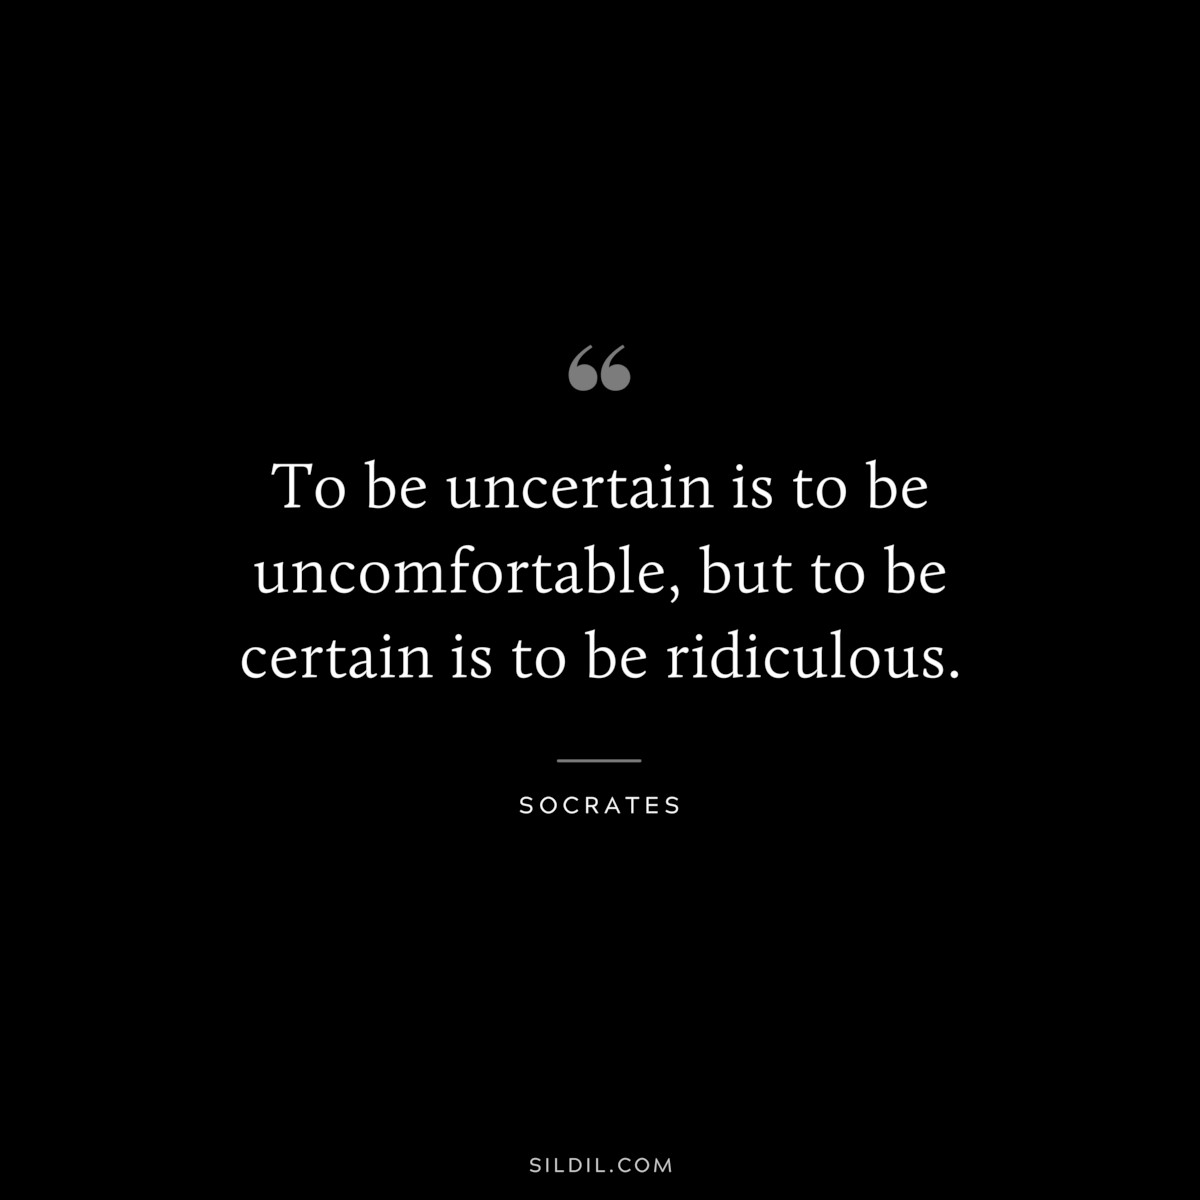 To be uncertain is to be uncomfortable, but to be certain is to be ridiculous. ― Socrates